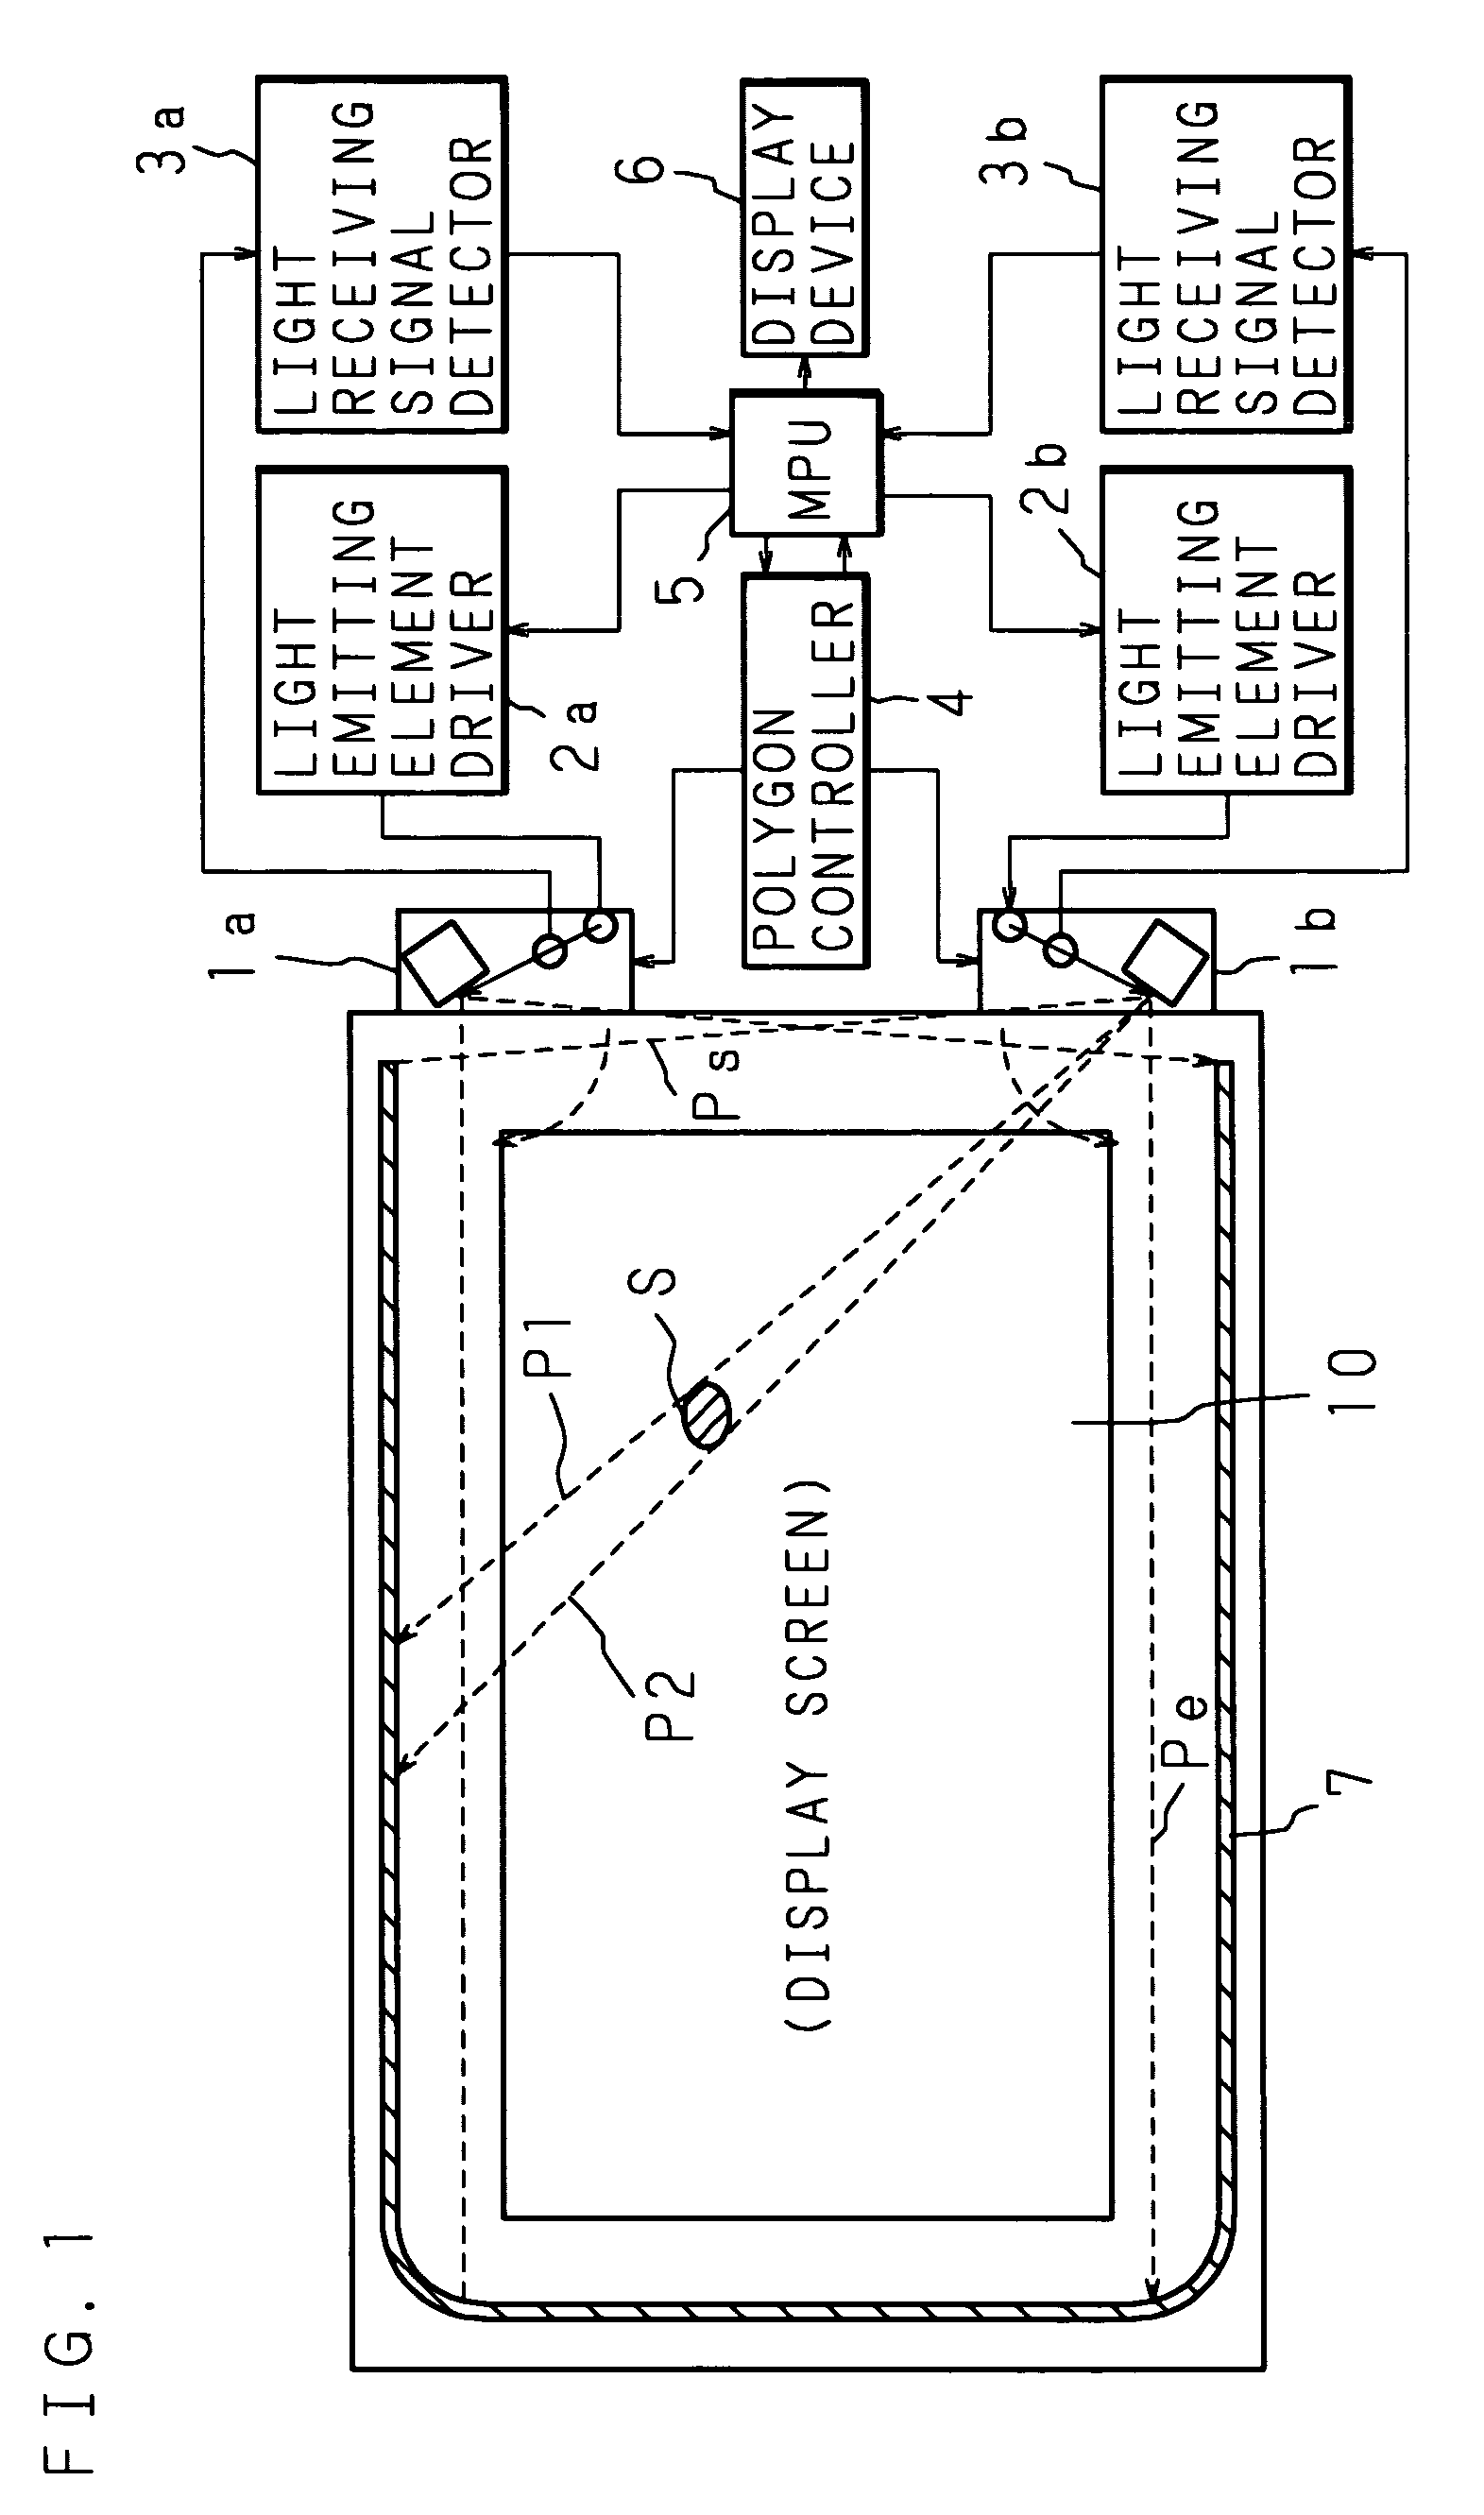 Optical scanning-type touch panel